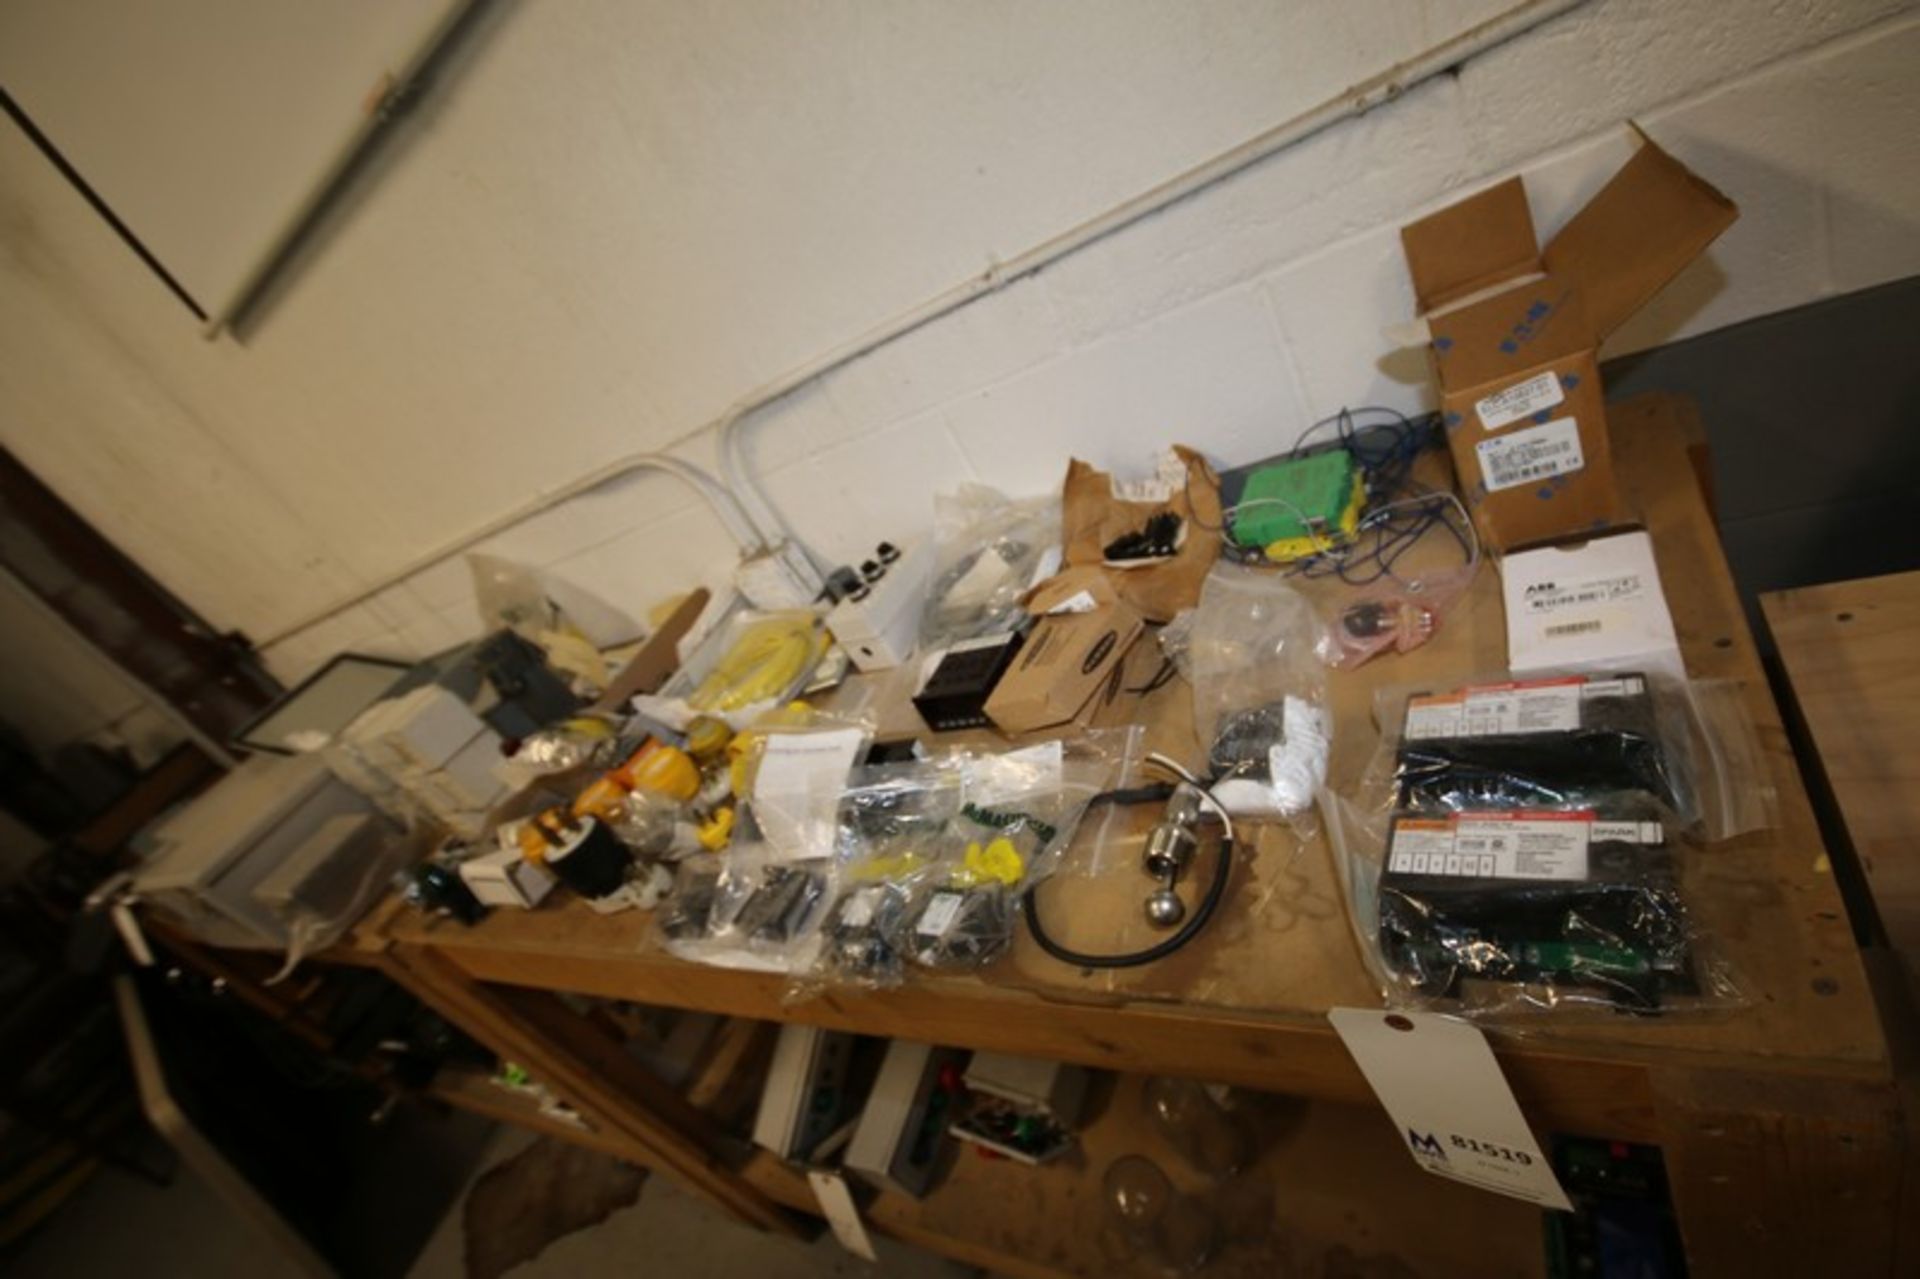 Lot of Assorted Electrical Including Boxes, Switches, Plugs, Breakers, Honeywell Spark Switch &